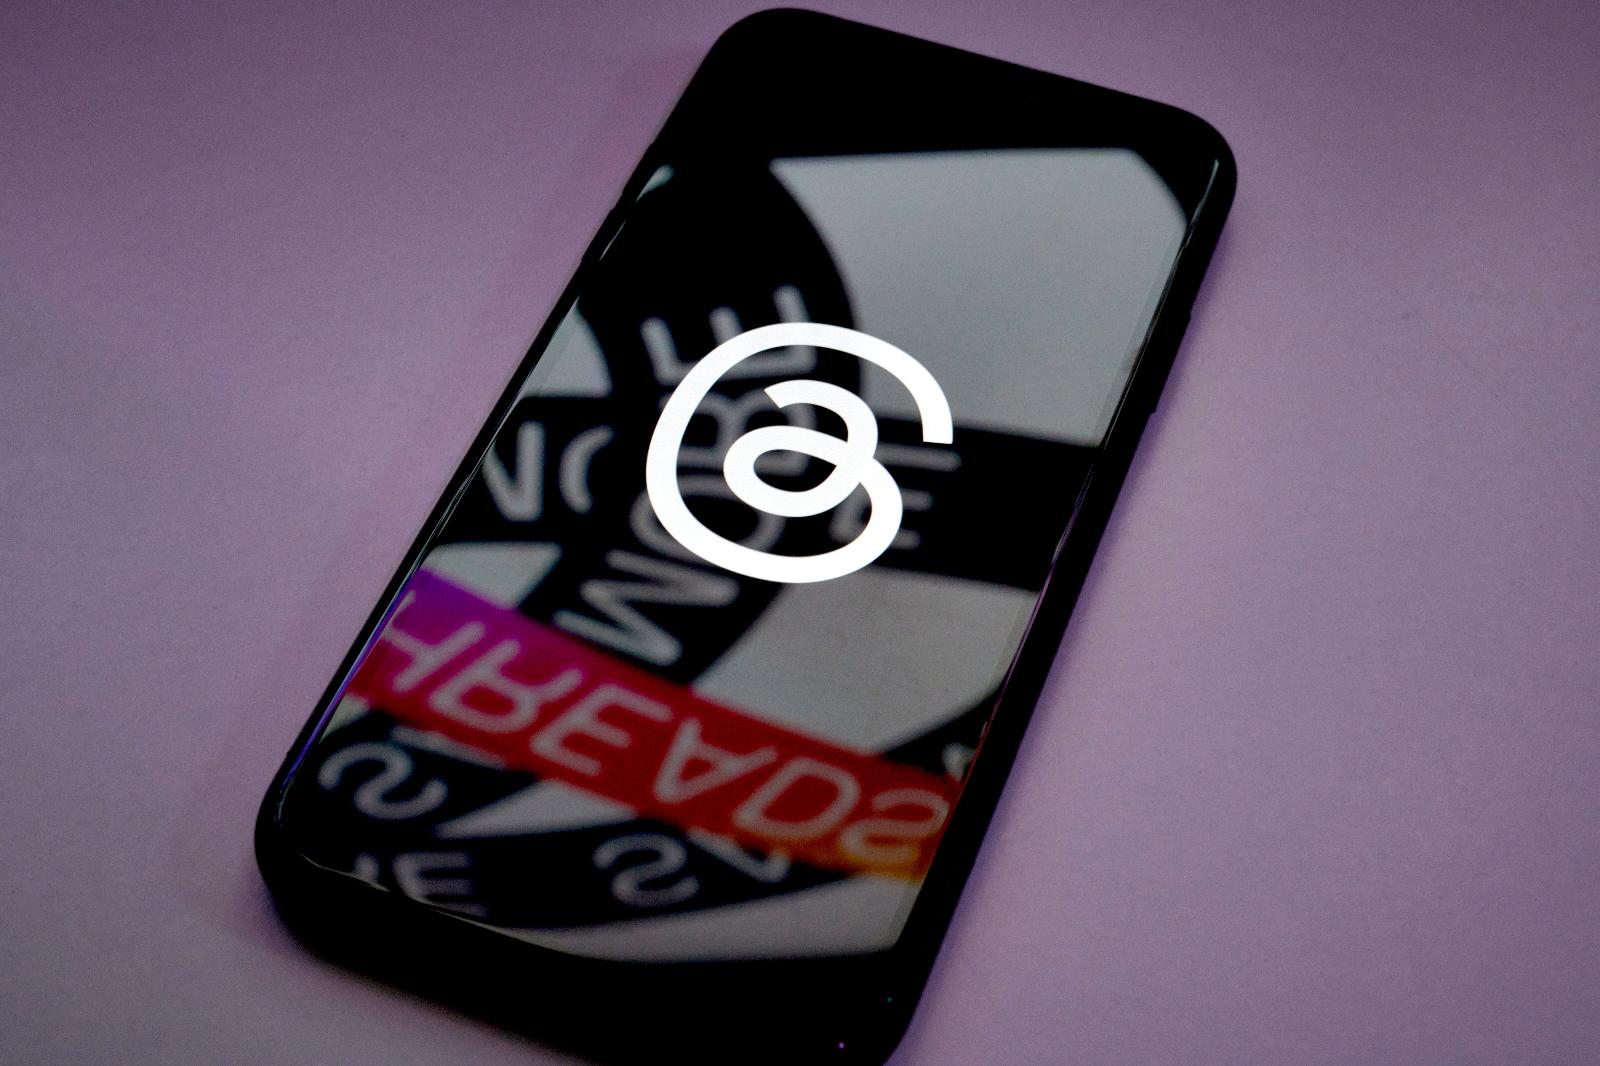 Threads expands search to ‘most’ English and Spanish-speaking countries, including U.S.